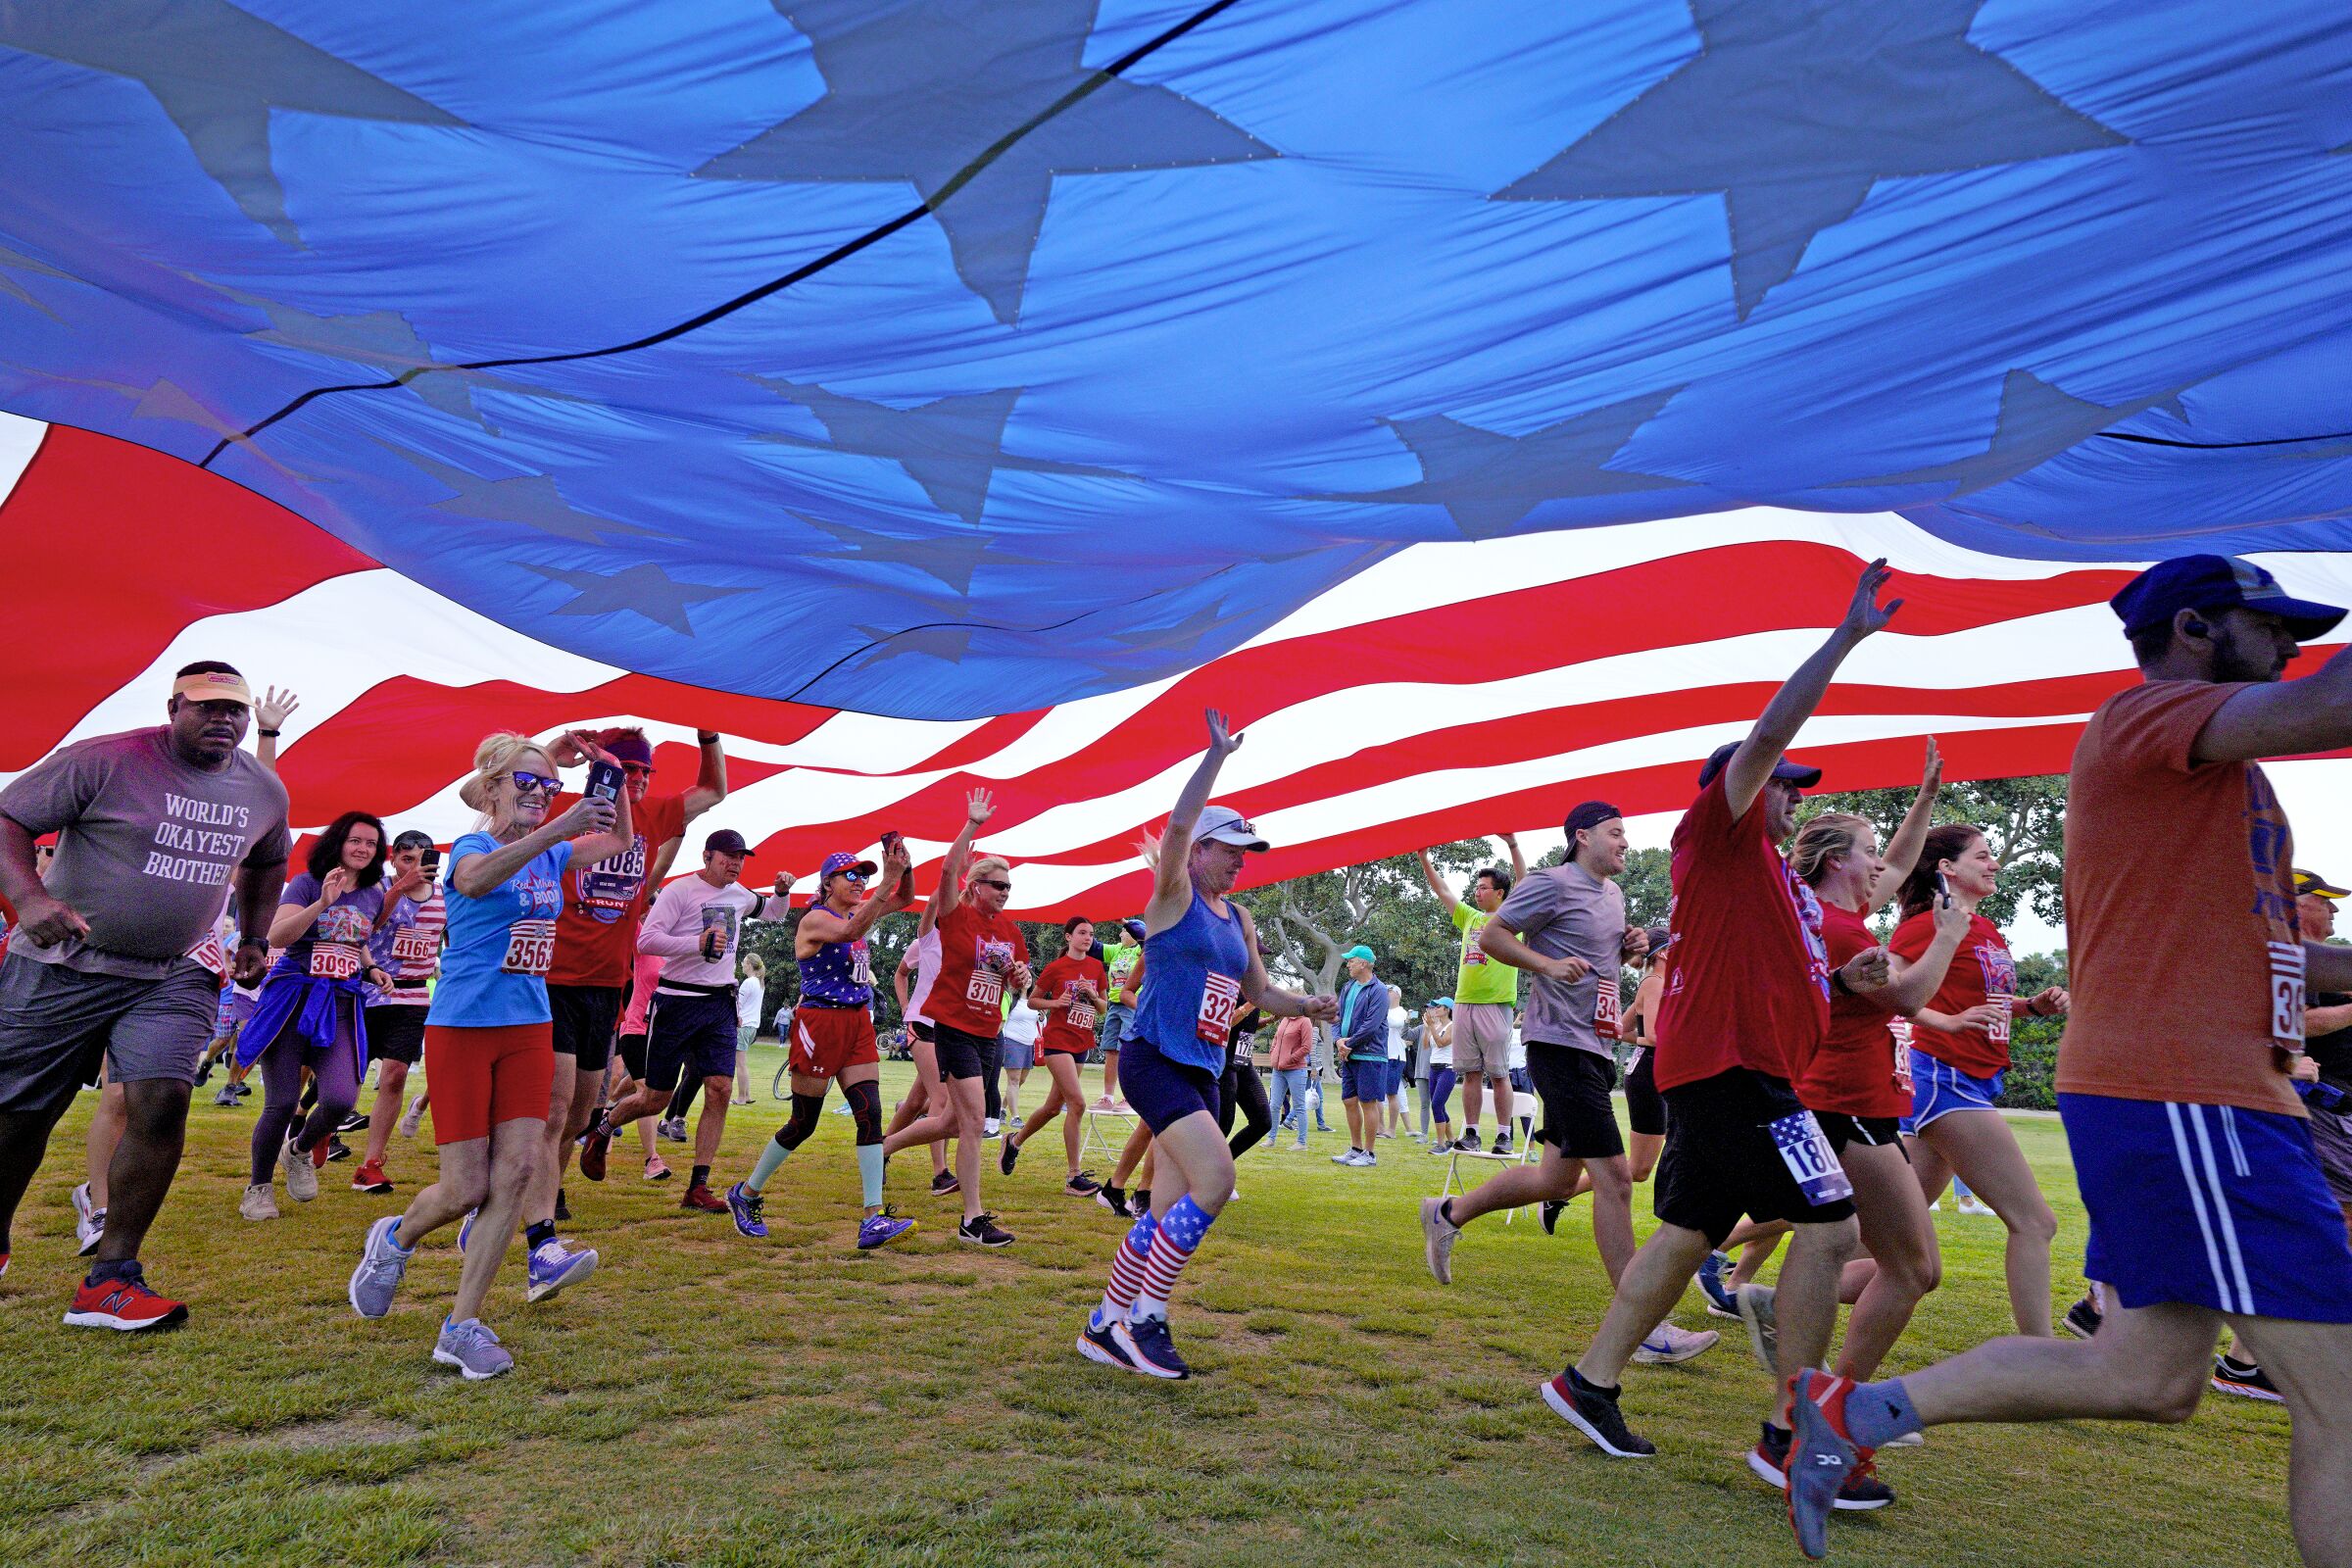 About 2,000 runners took part in the staggered start for the Crown City Classic July 4th 12K and 5K race last year.